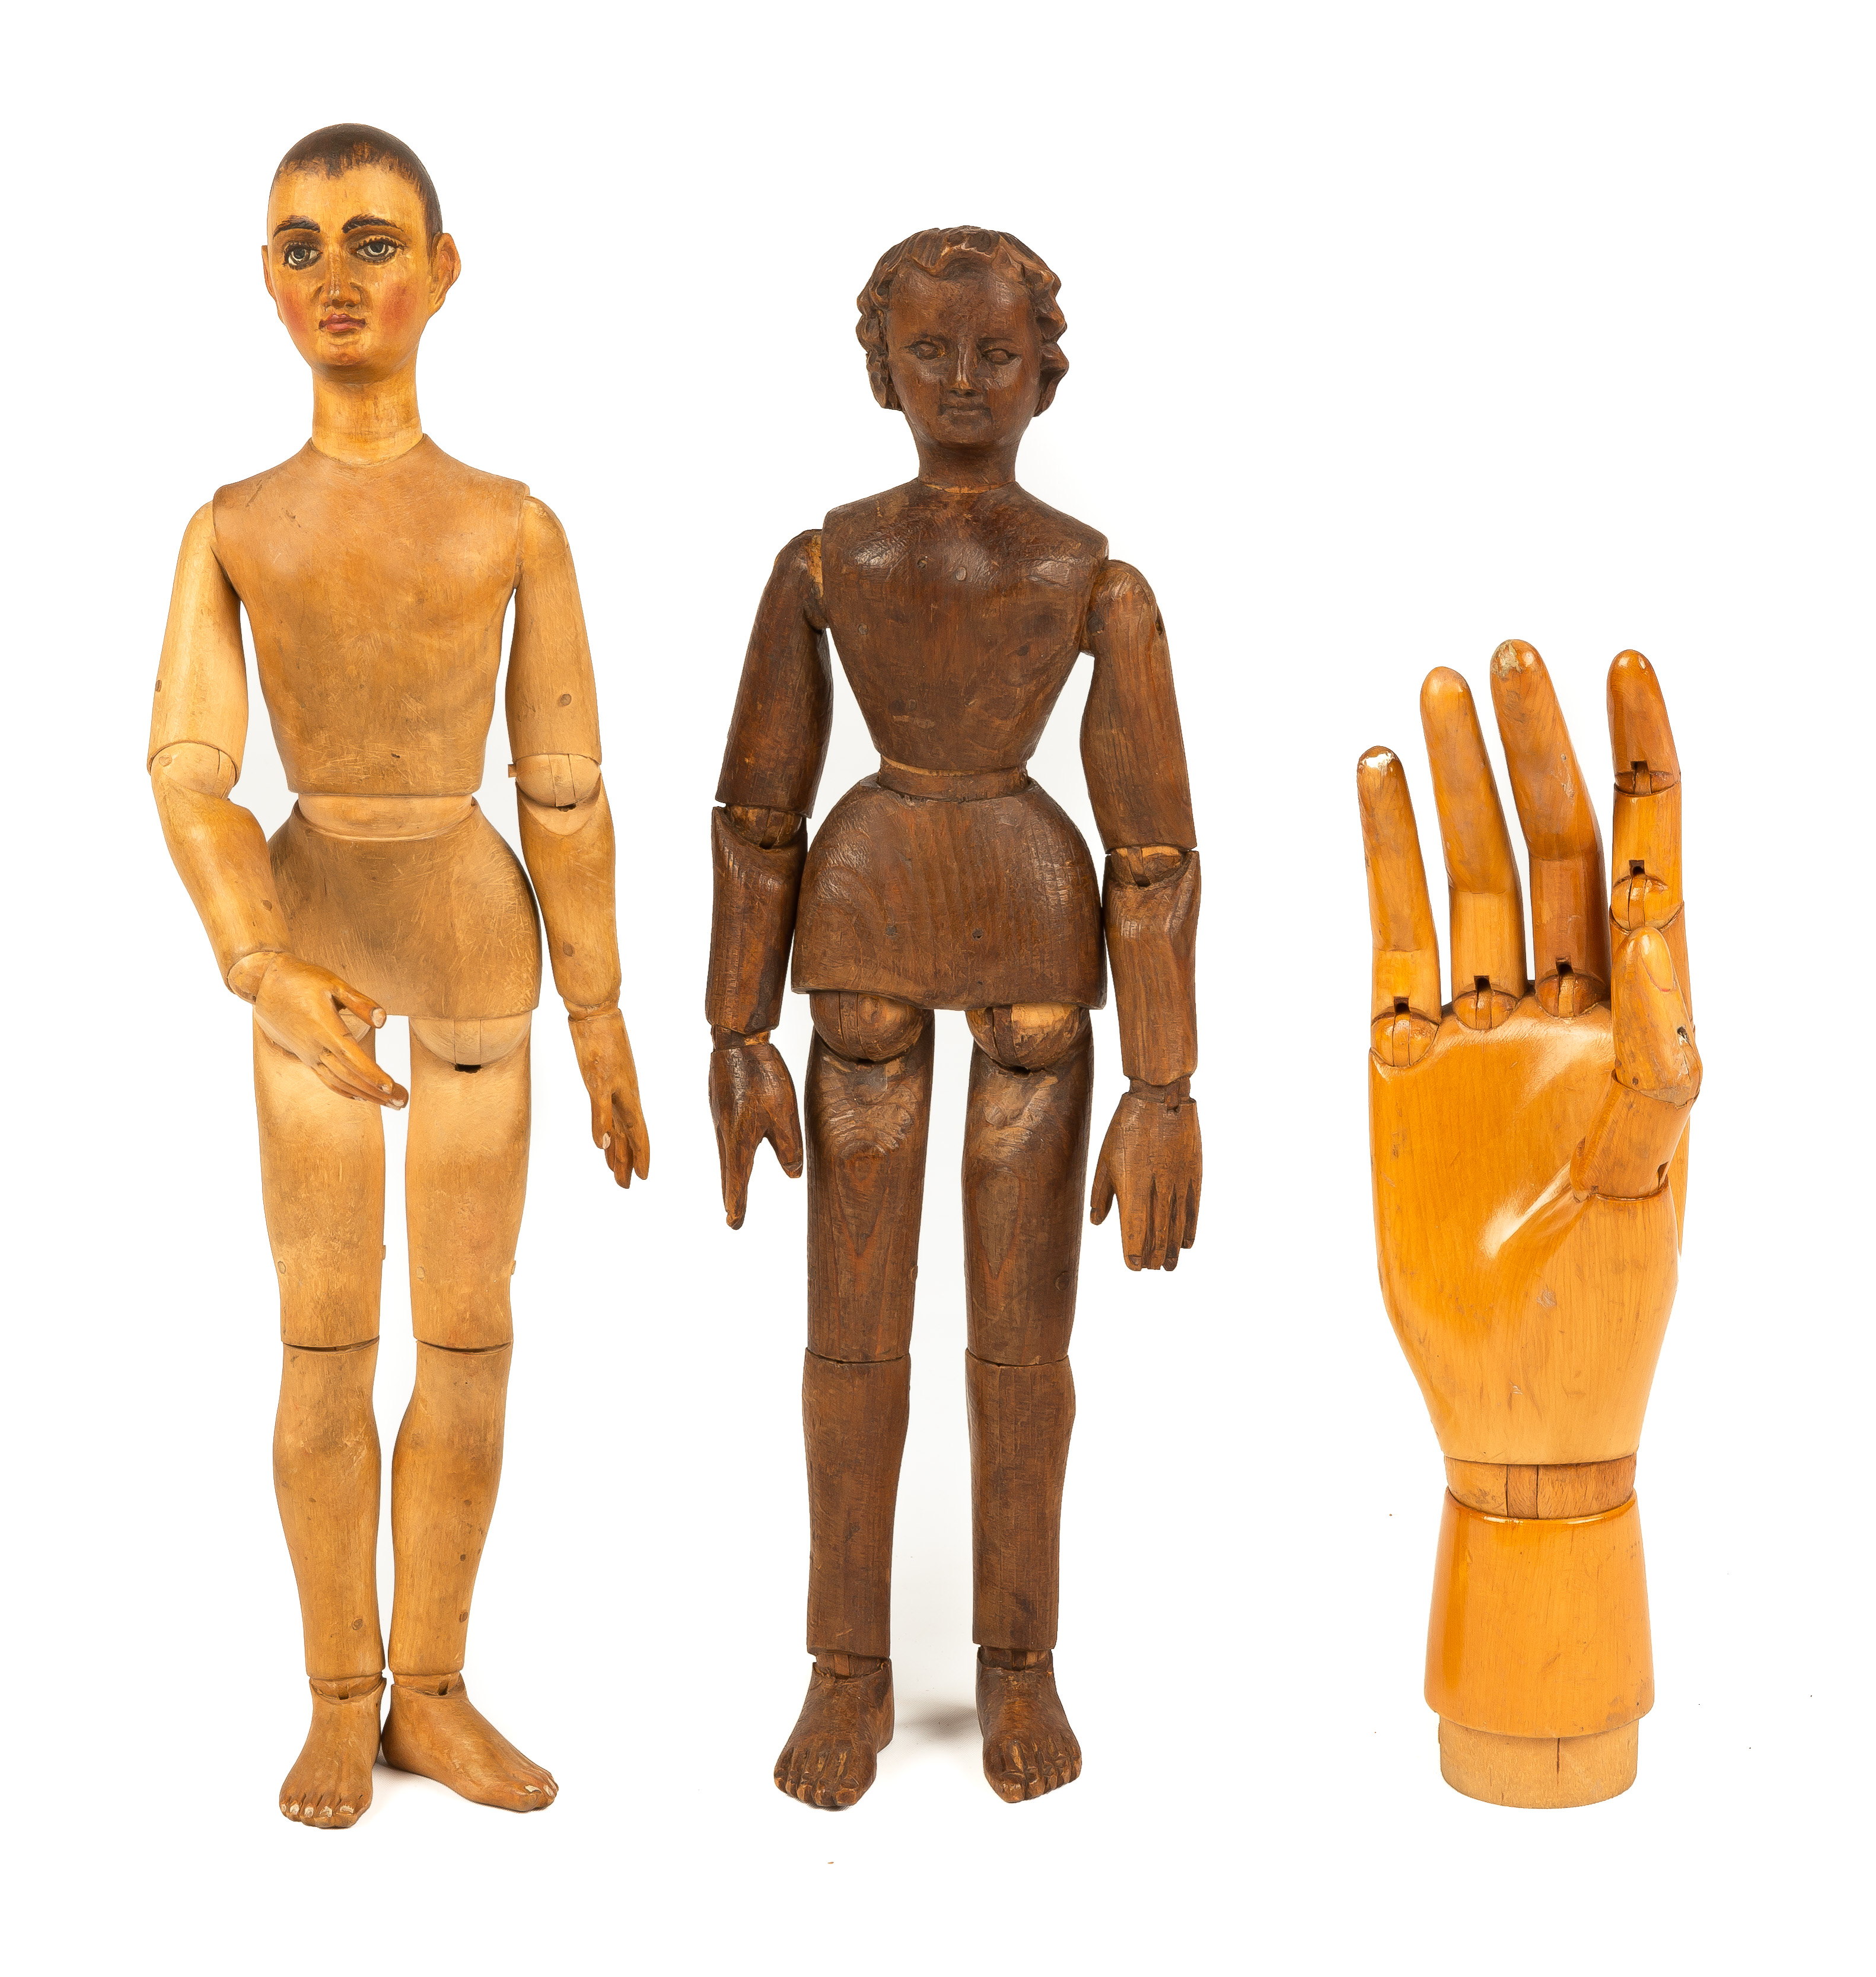 TWO RETICULATED ARTIST MODELS AND HAND